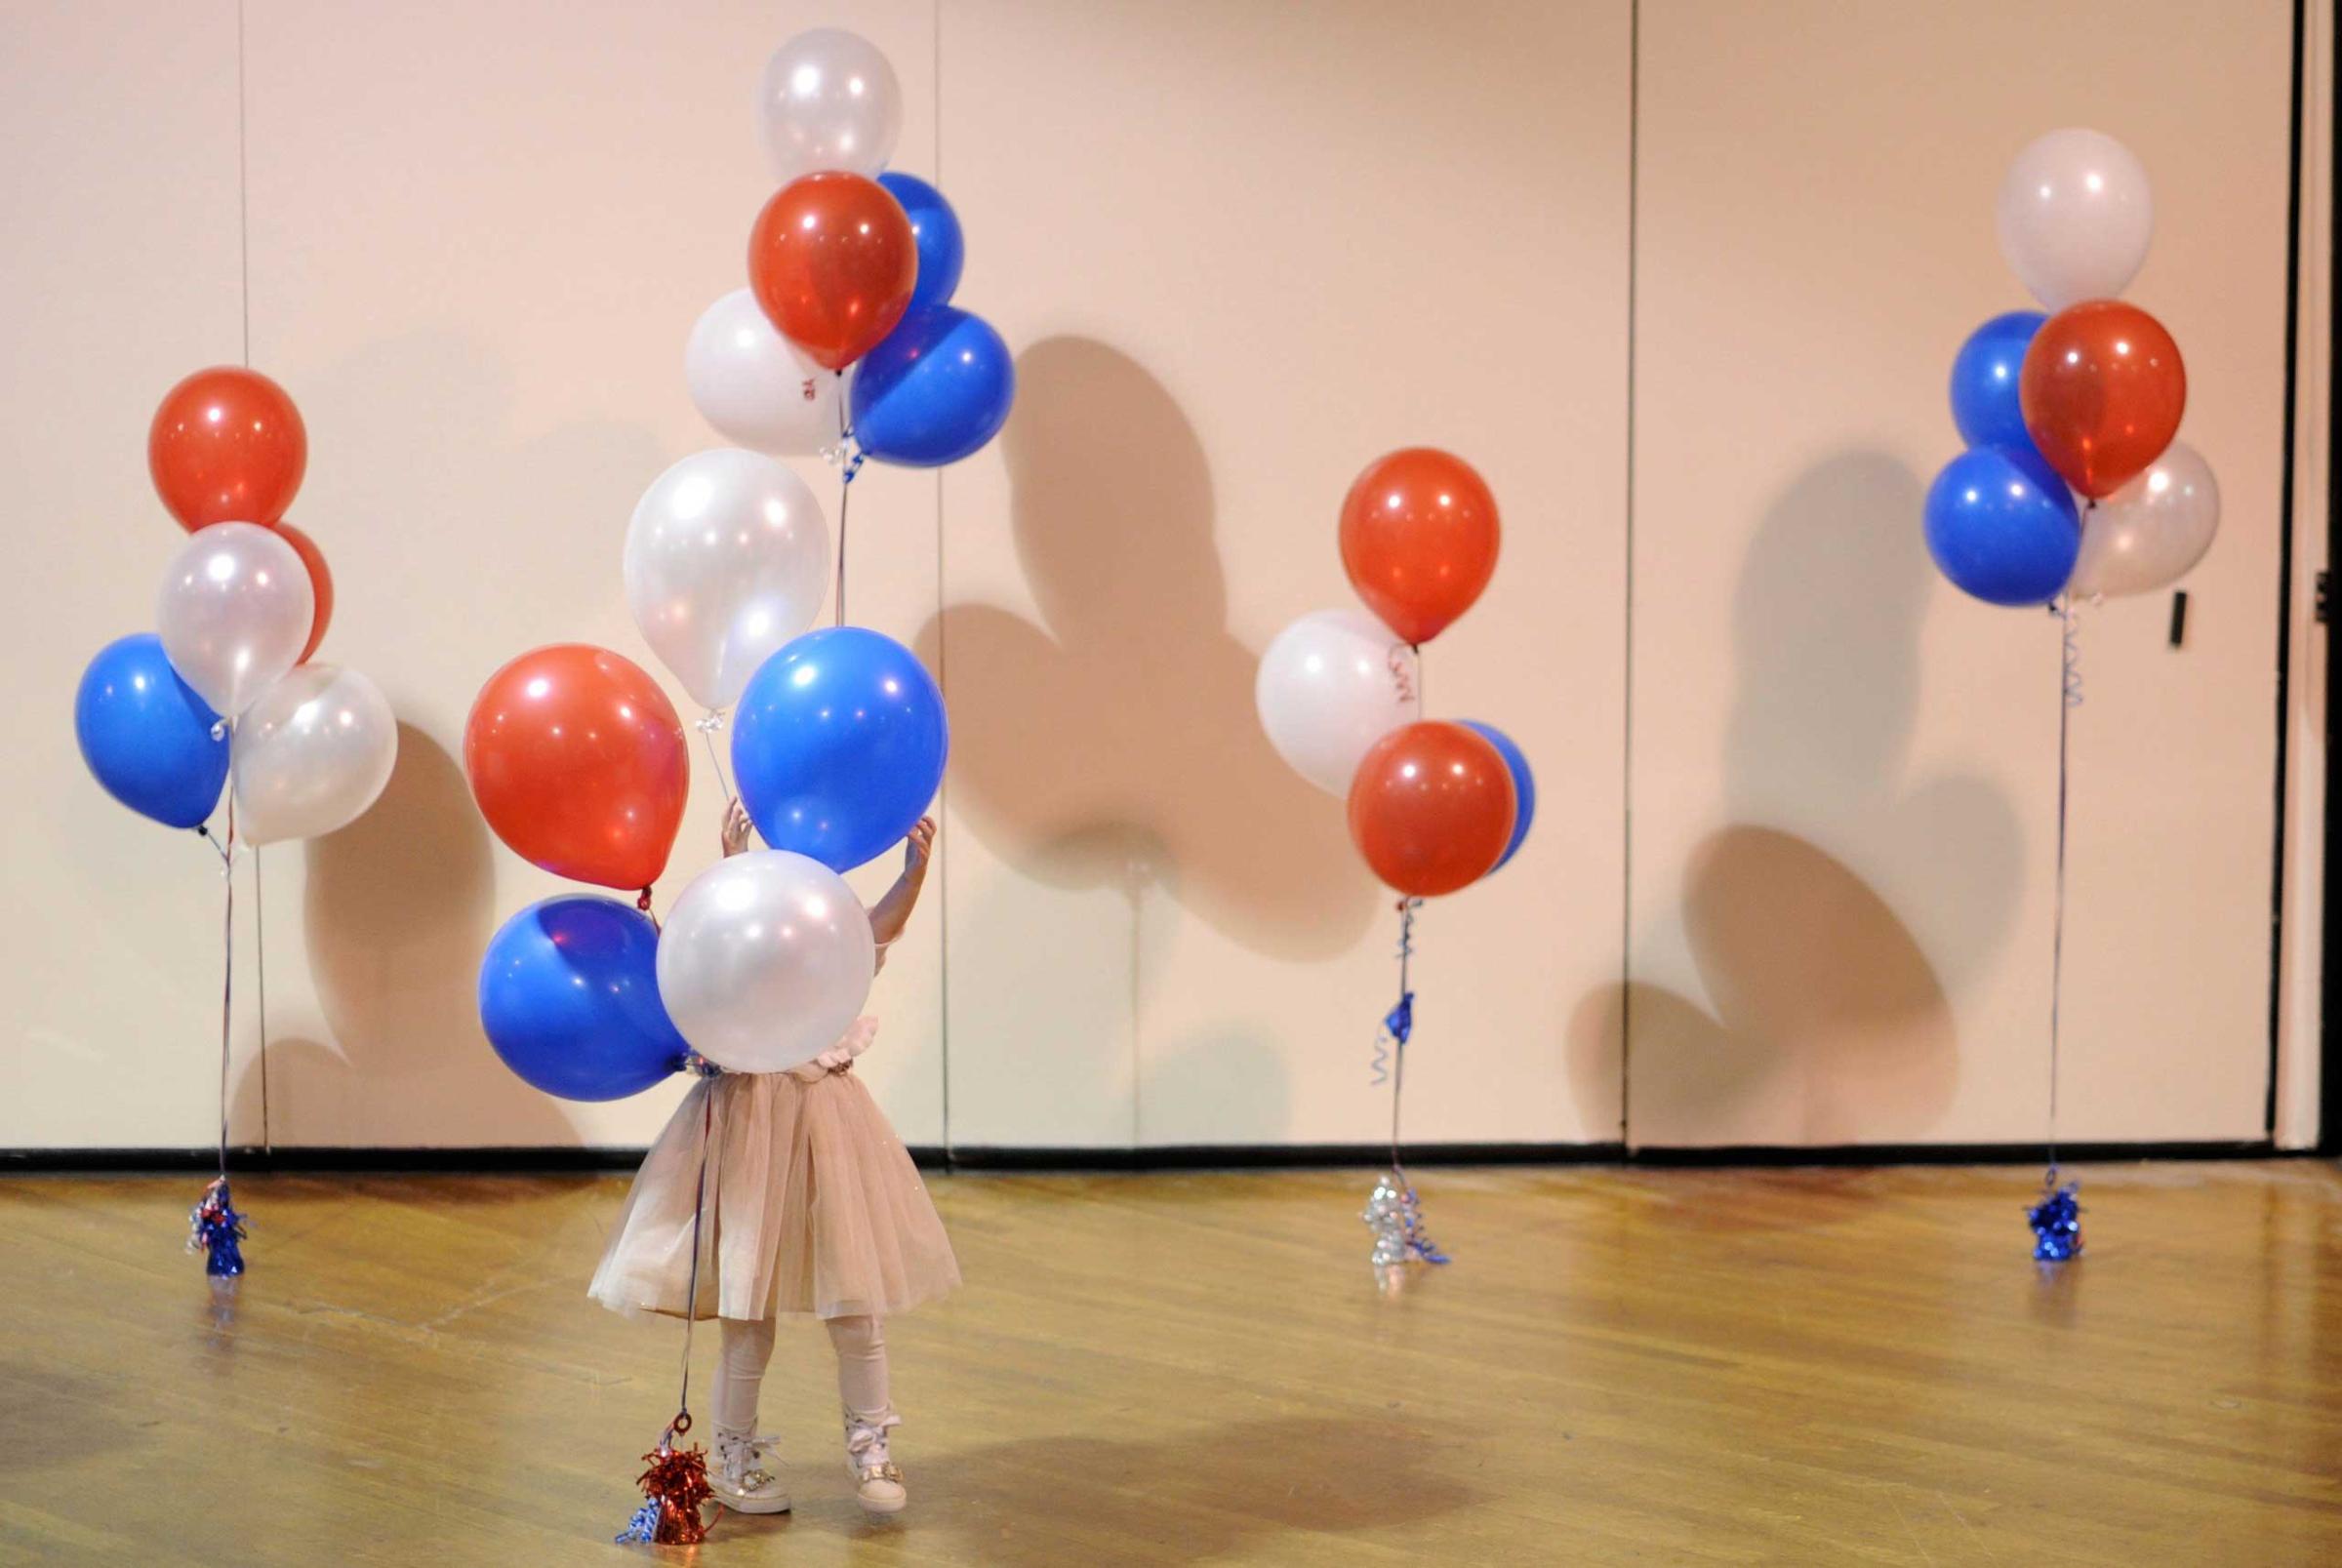 A little girl plays with balloons at Republican U.S. Senate candidate Scott Brown's midterm election night rally in Manchester